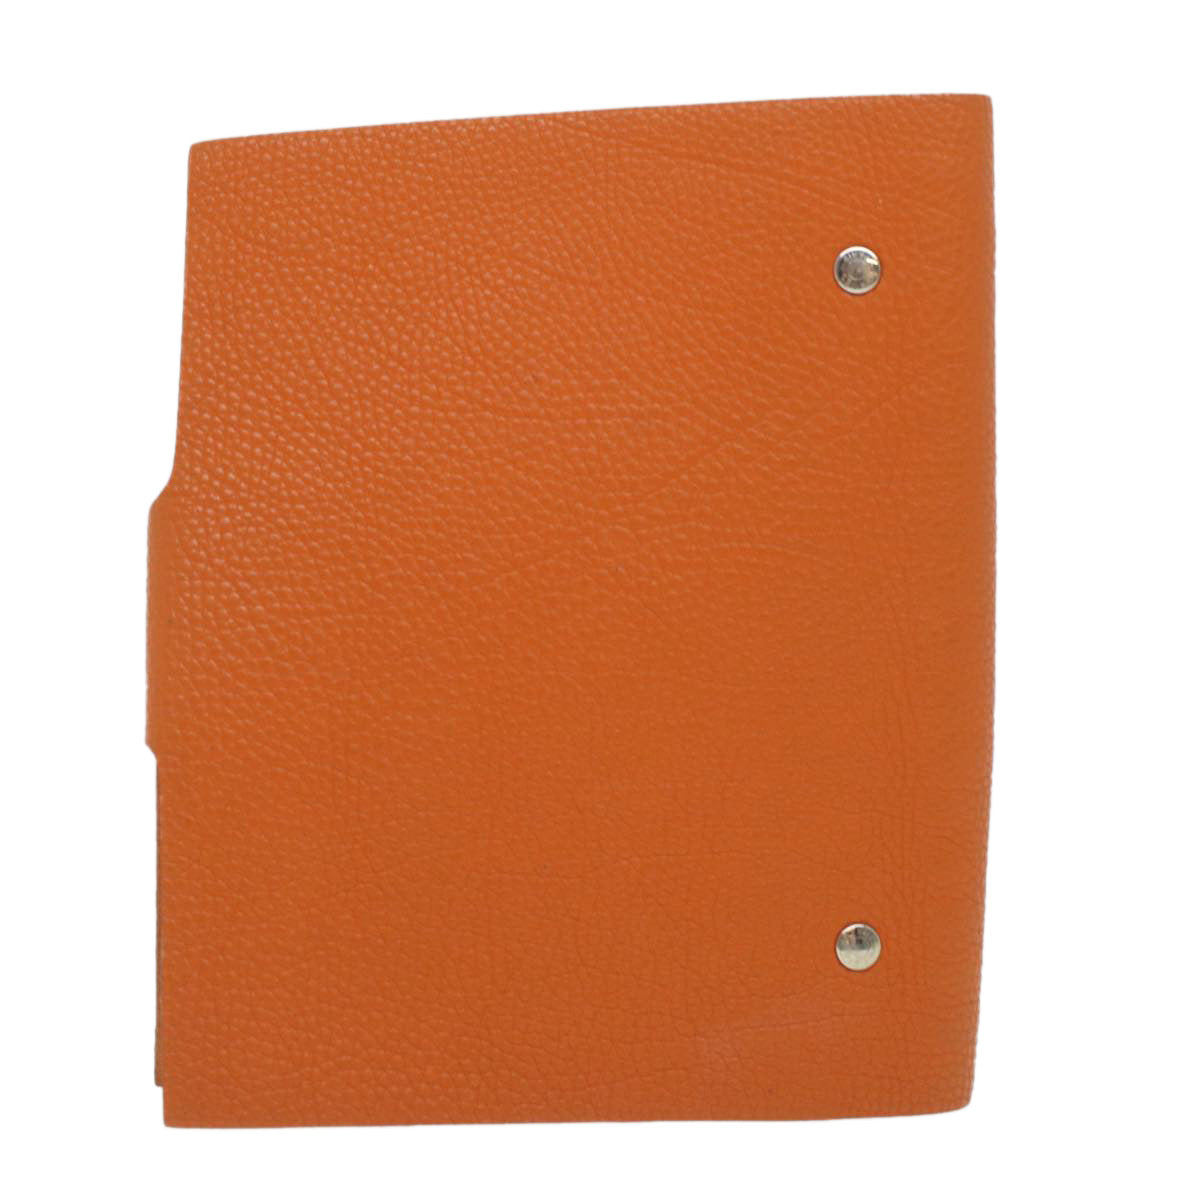 HERMES Yuris MM Note Cover Leather Orange Auth th3439 - 0